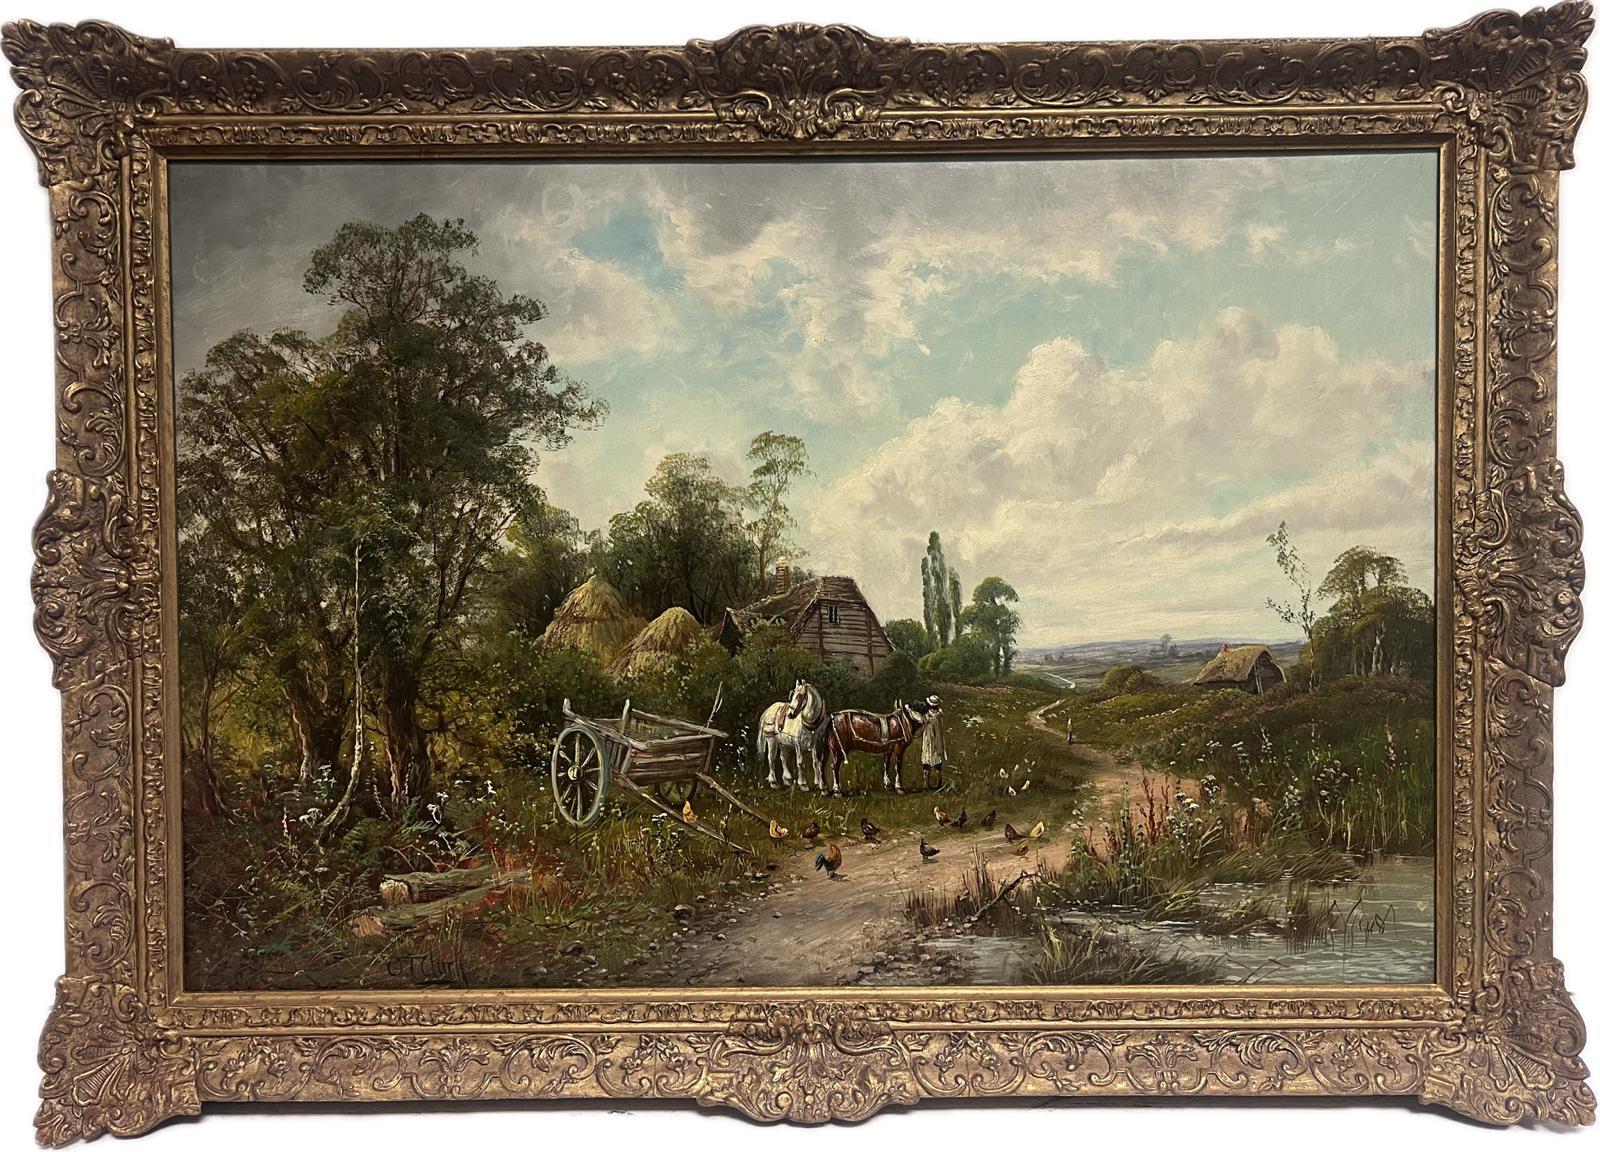 Large Victorian Rural English Oil Painting Horses & Chickens Farm Landscape